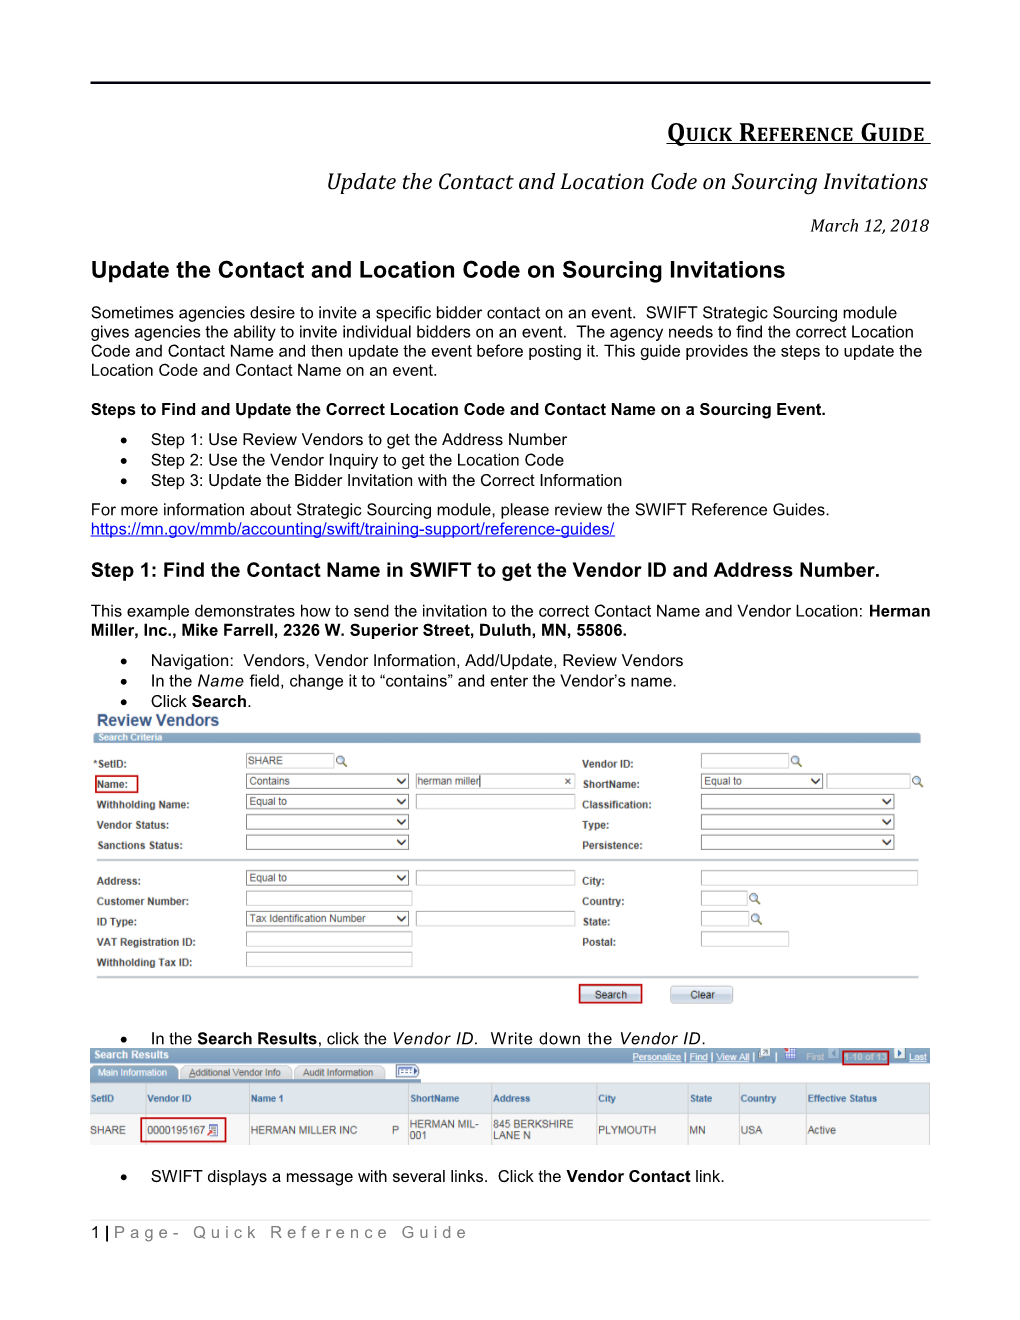 Update Contract and Location Code on Sourcing